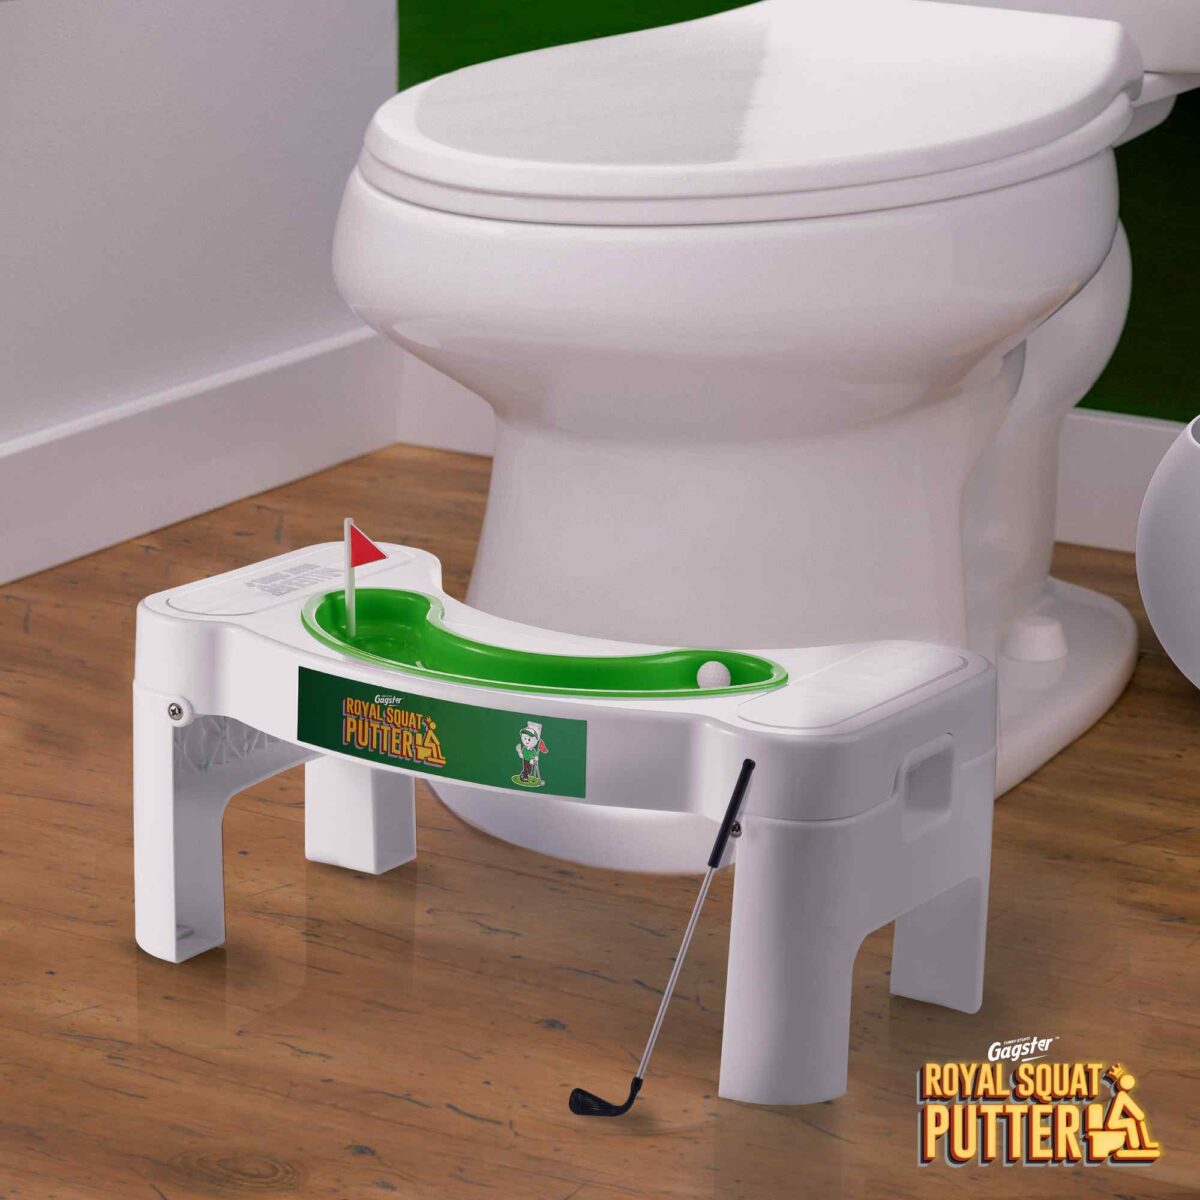 toilet golf toliet games gifts for men games gag gift poop funny potty gifts